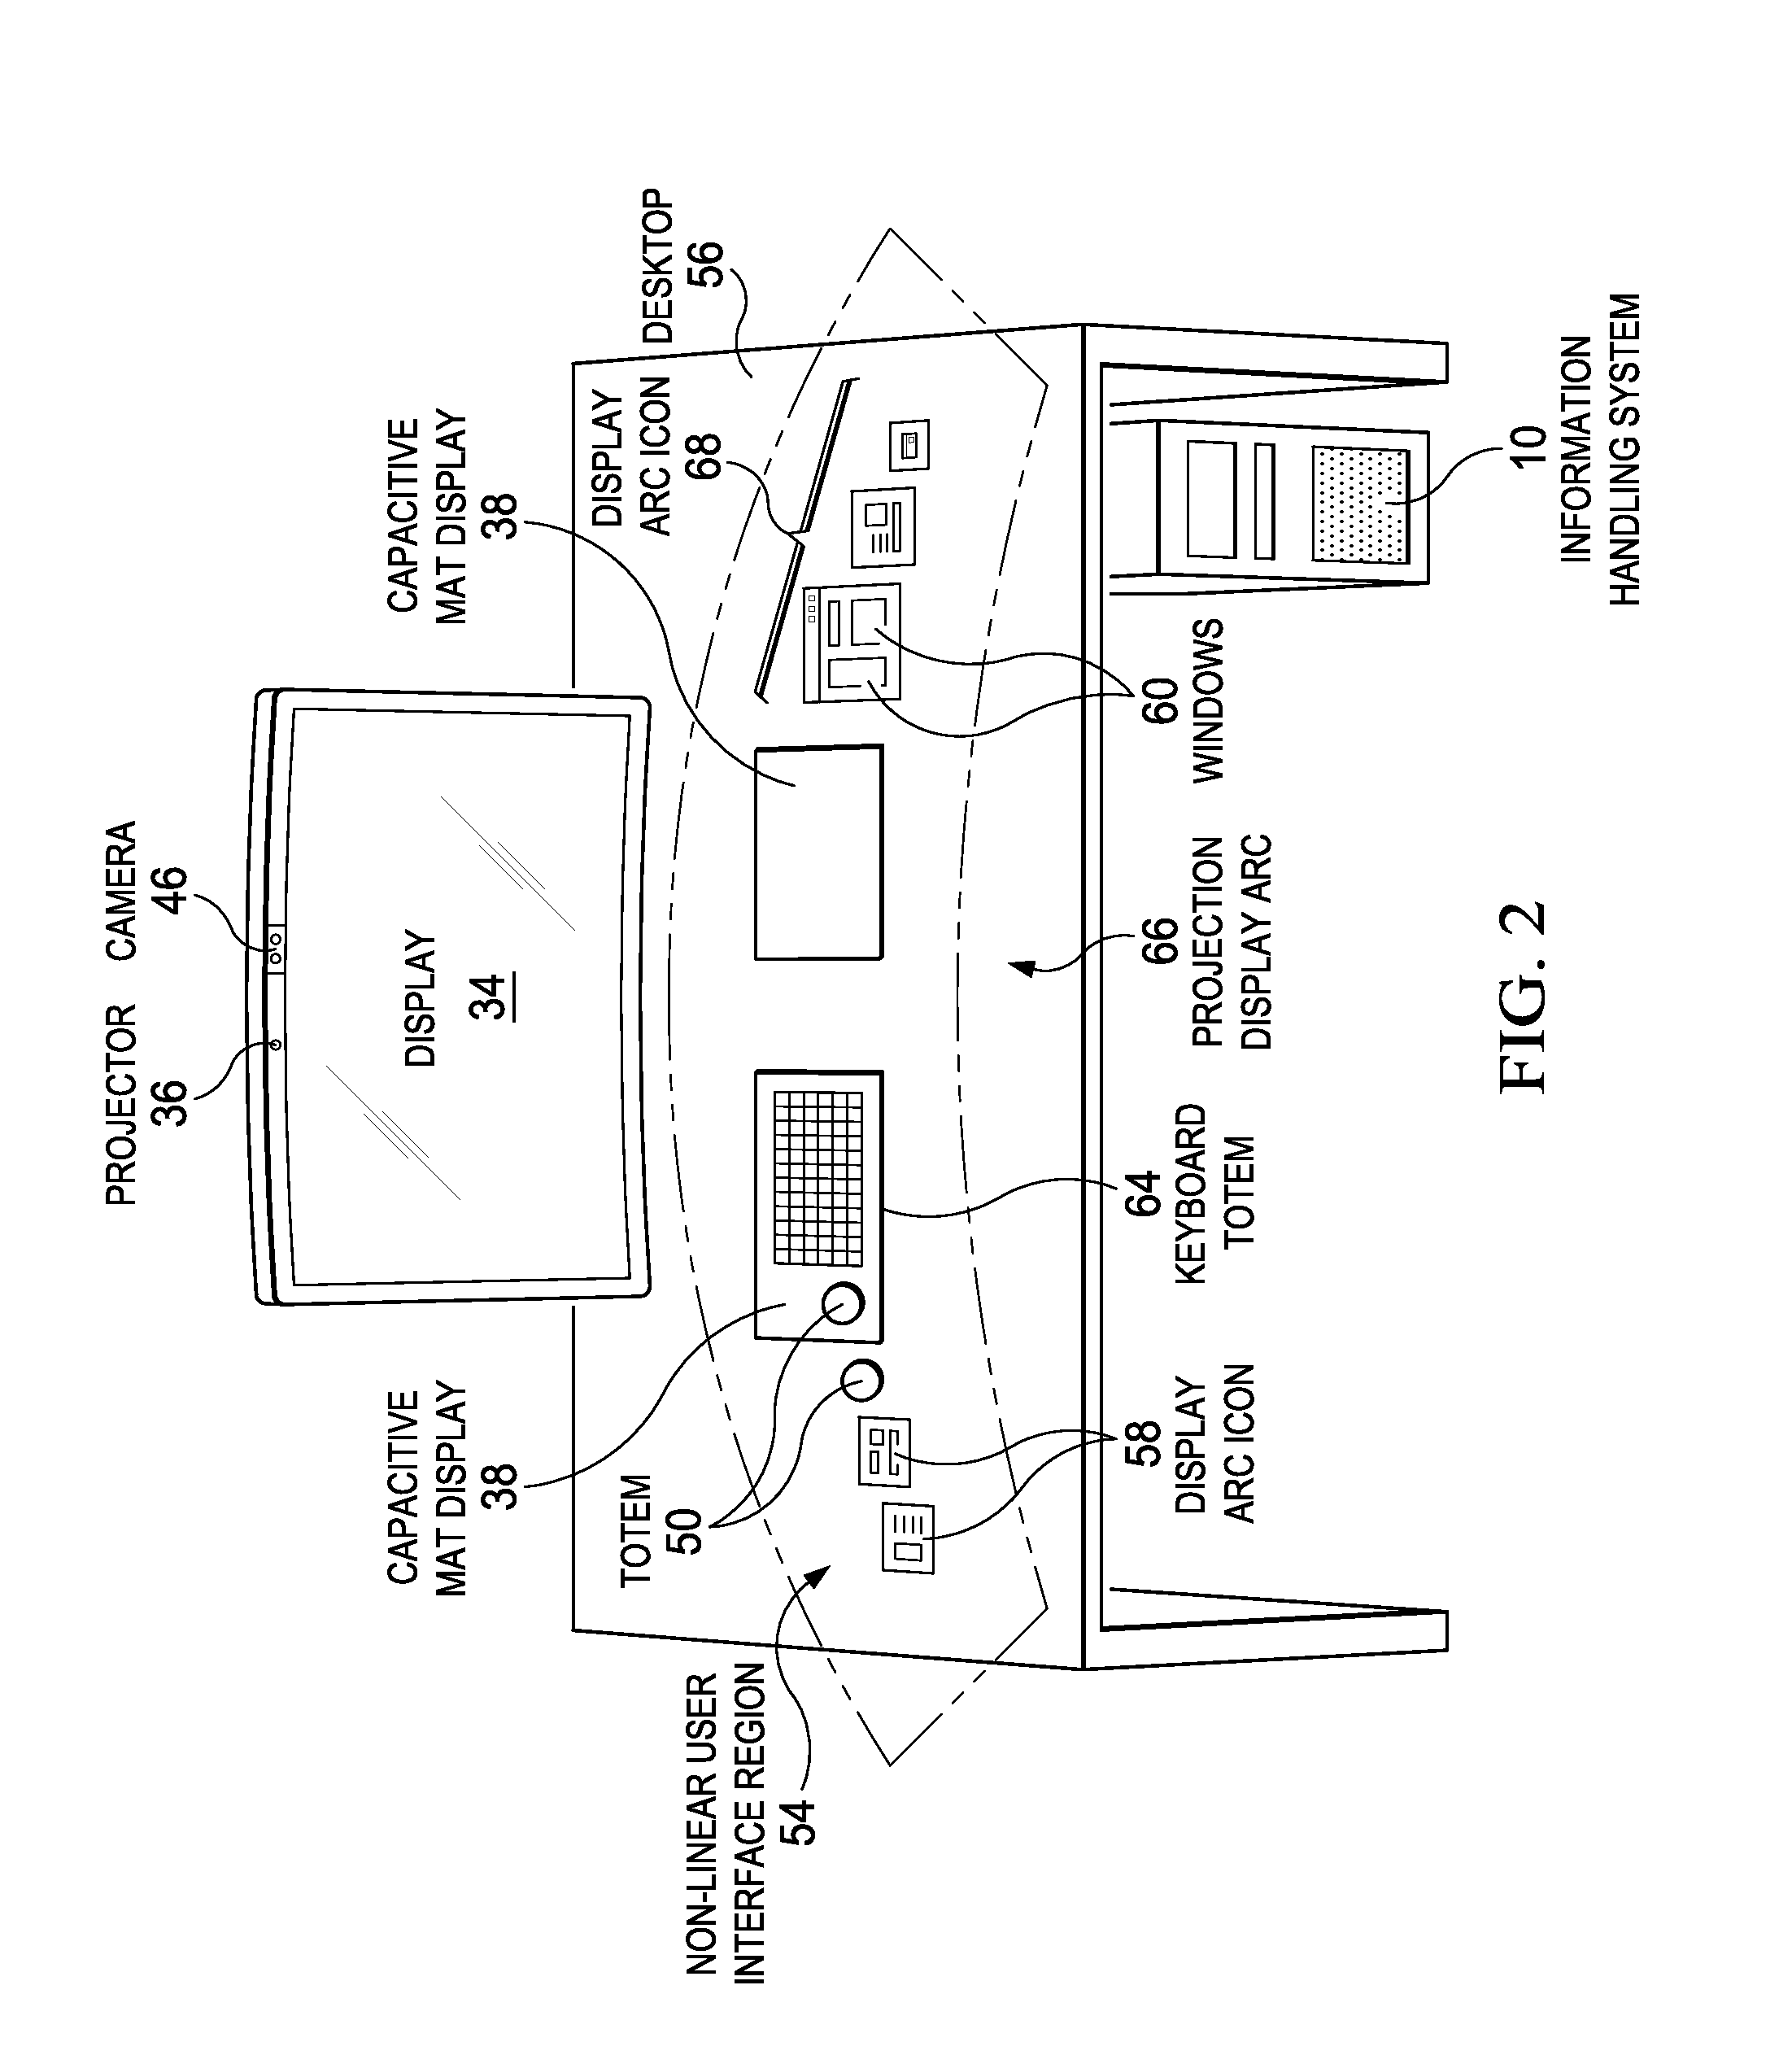 Capacitive Mat Information Handling System Display and Totem Interactions